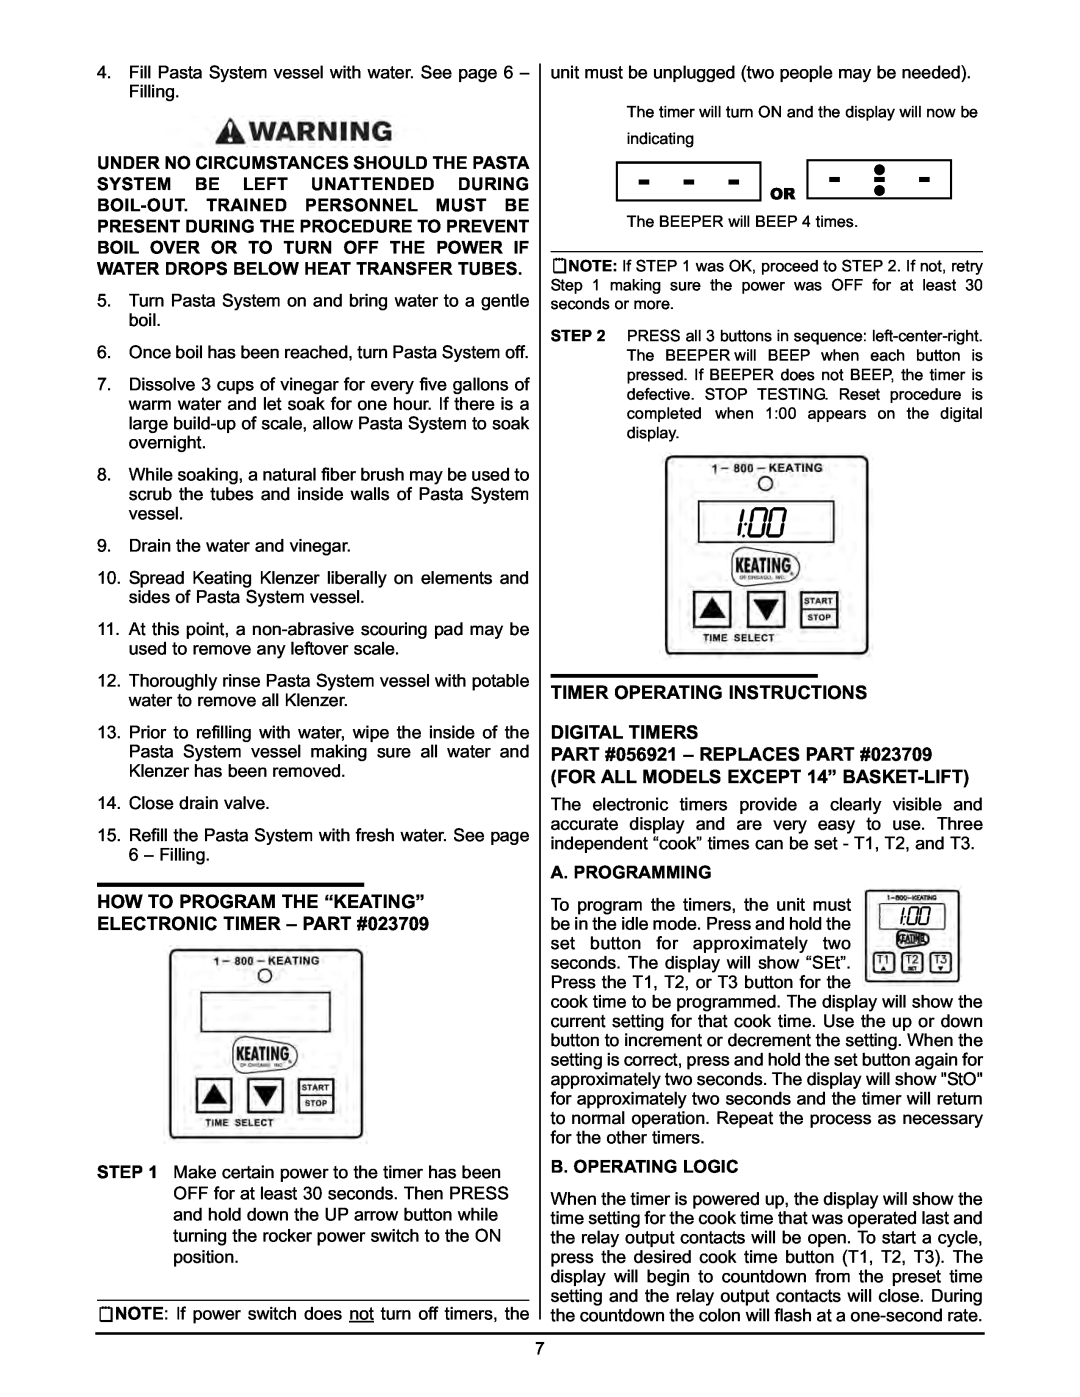 Keating Of Chicago 2009 manual Timer Operating Instructions, Digital Timers, PART #056921 - REPLACES PART #023709 